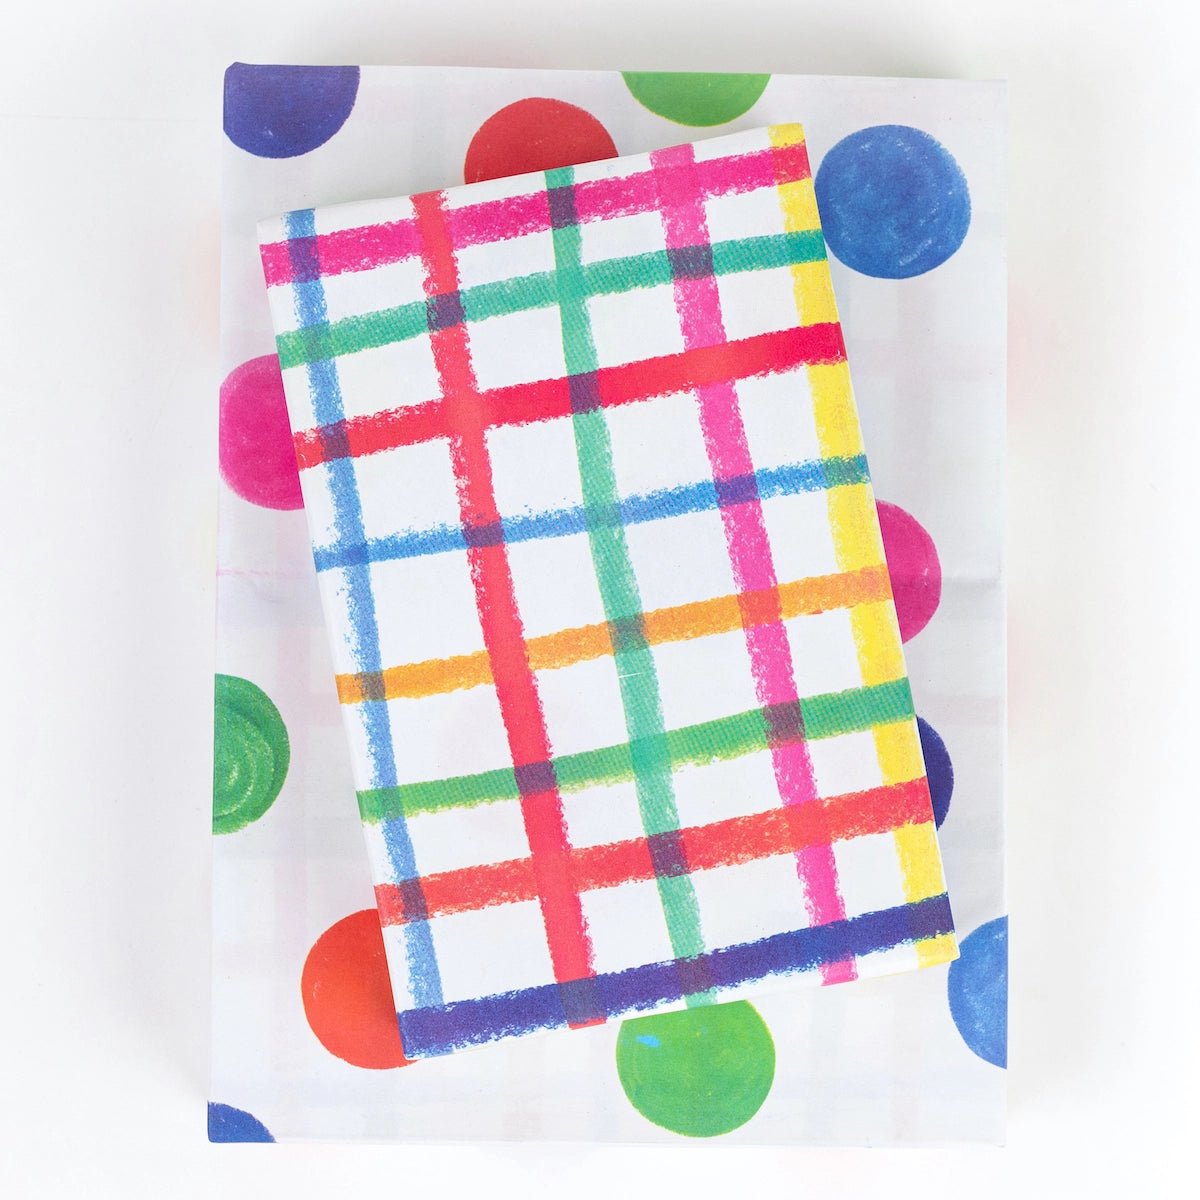 Double-sided Eco Wrapping Paper - oh-eco